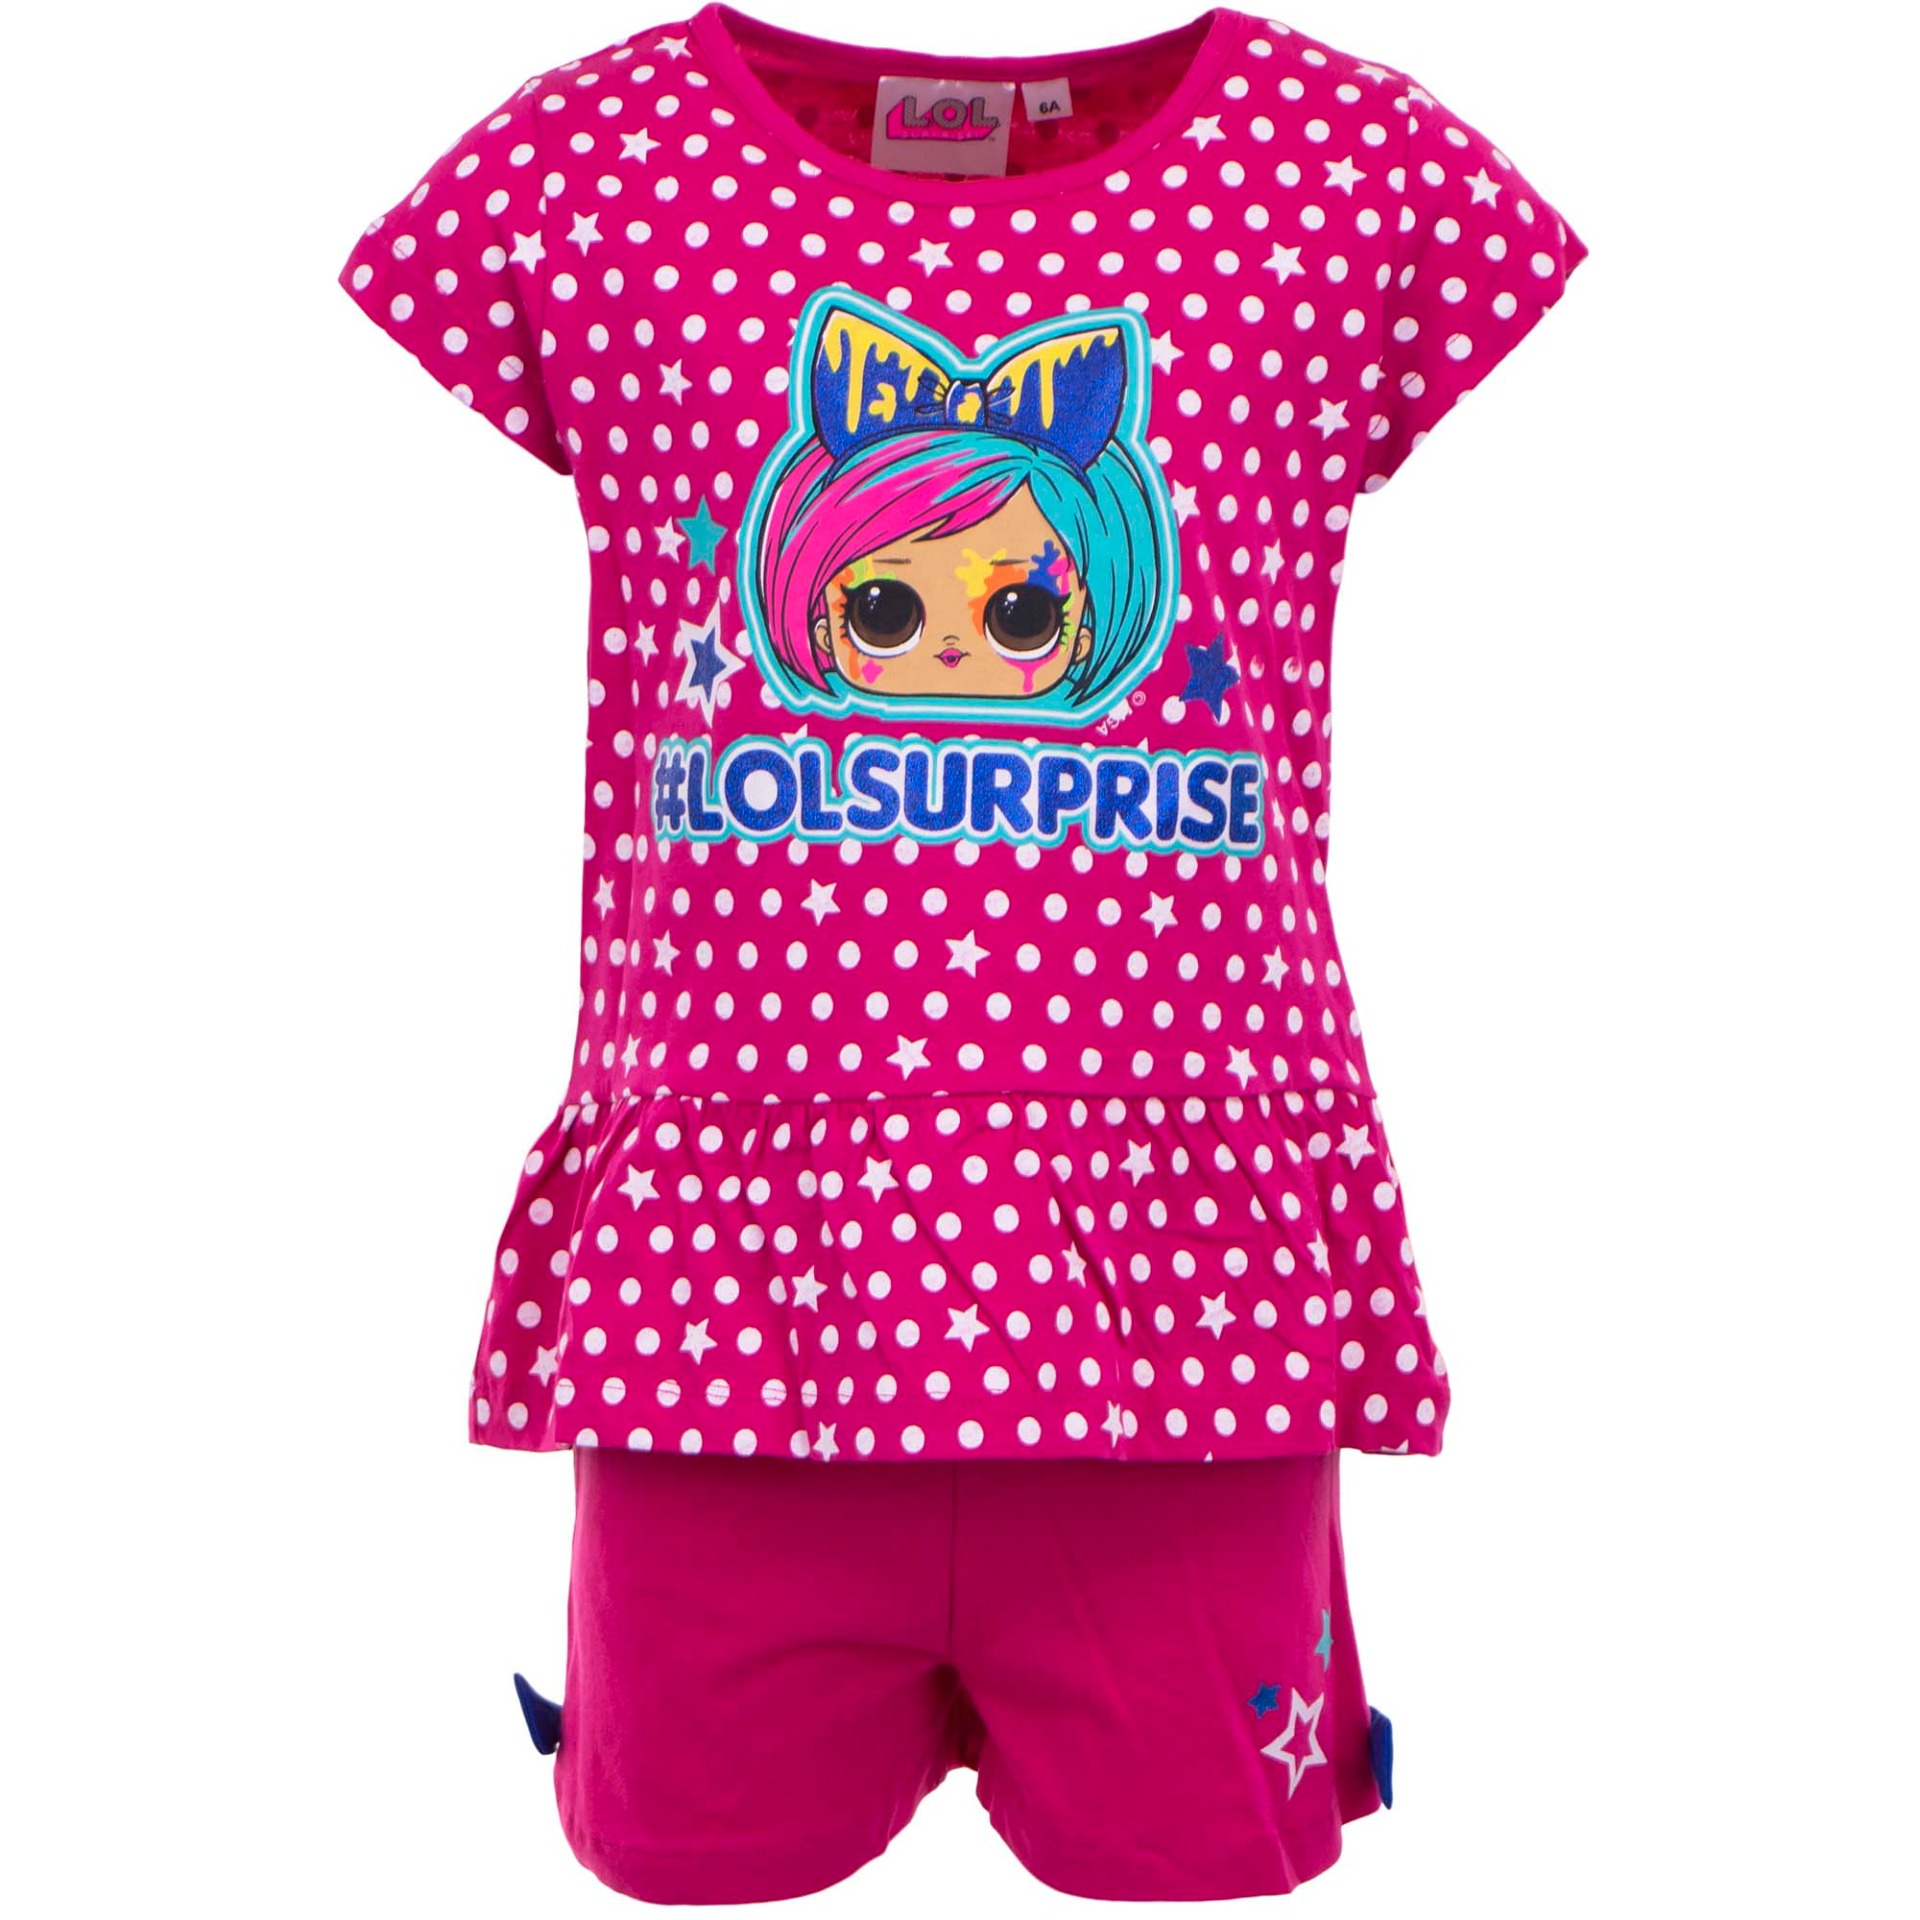 clothes-for-children-wholesale-disney-characters0025_-_ue2044_3_